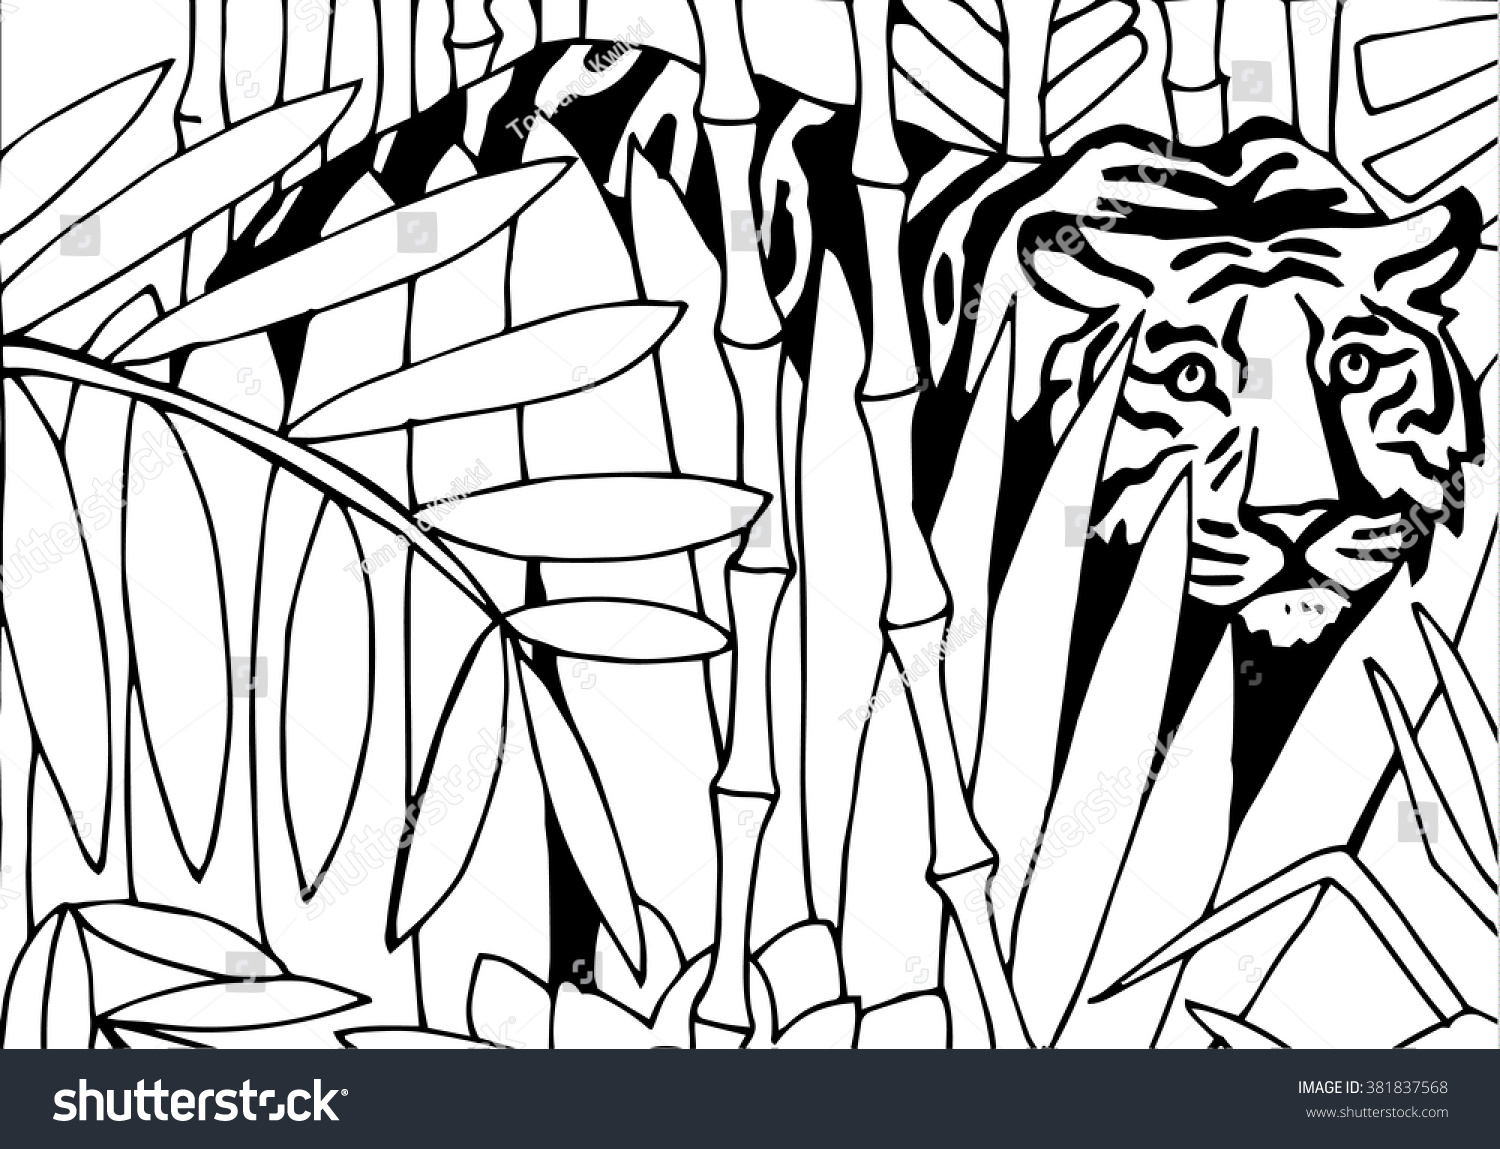 Download Tiger Jungle Coloring Page Stock Vector 381837568 ...